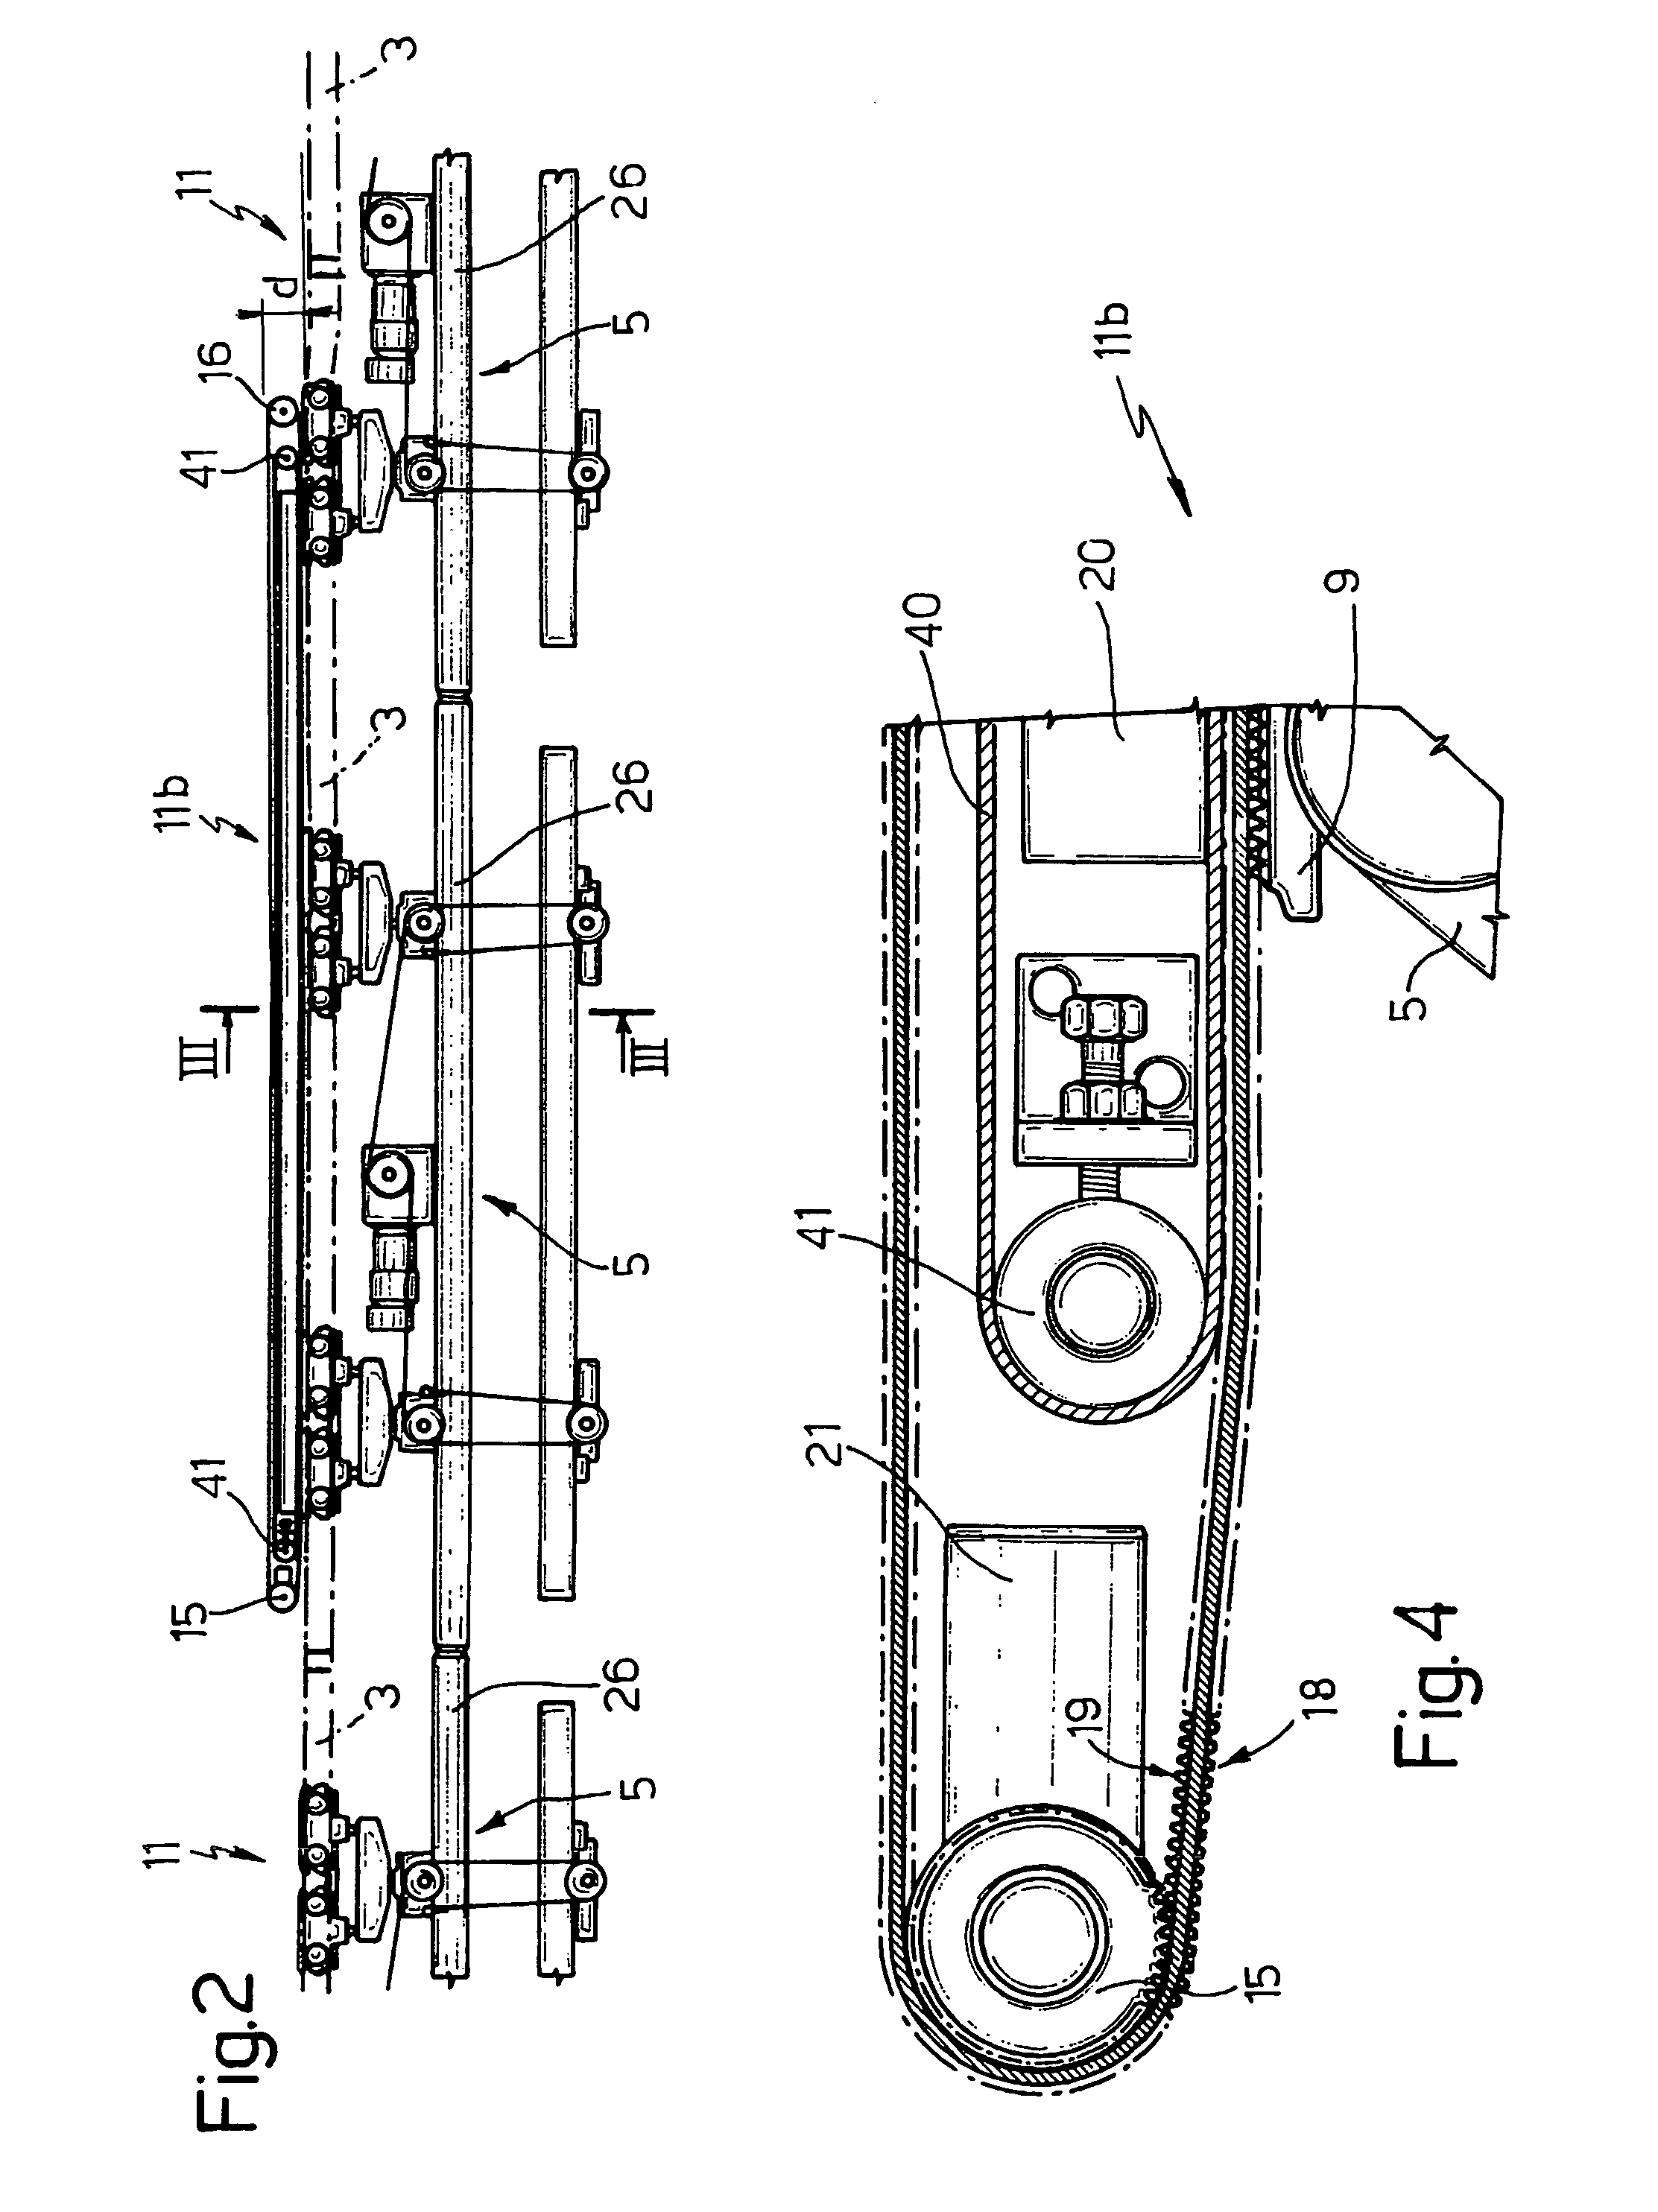 Integrated conveyor system for moving loads, in particular vehicles, along a production line